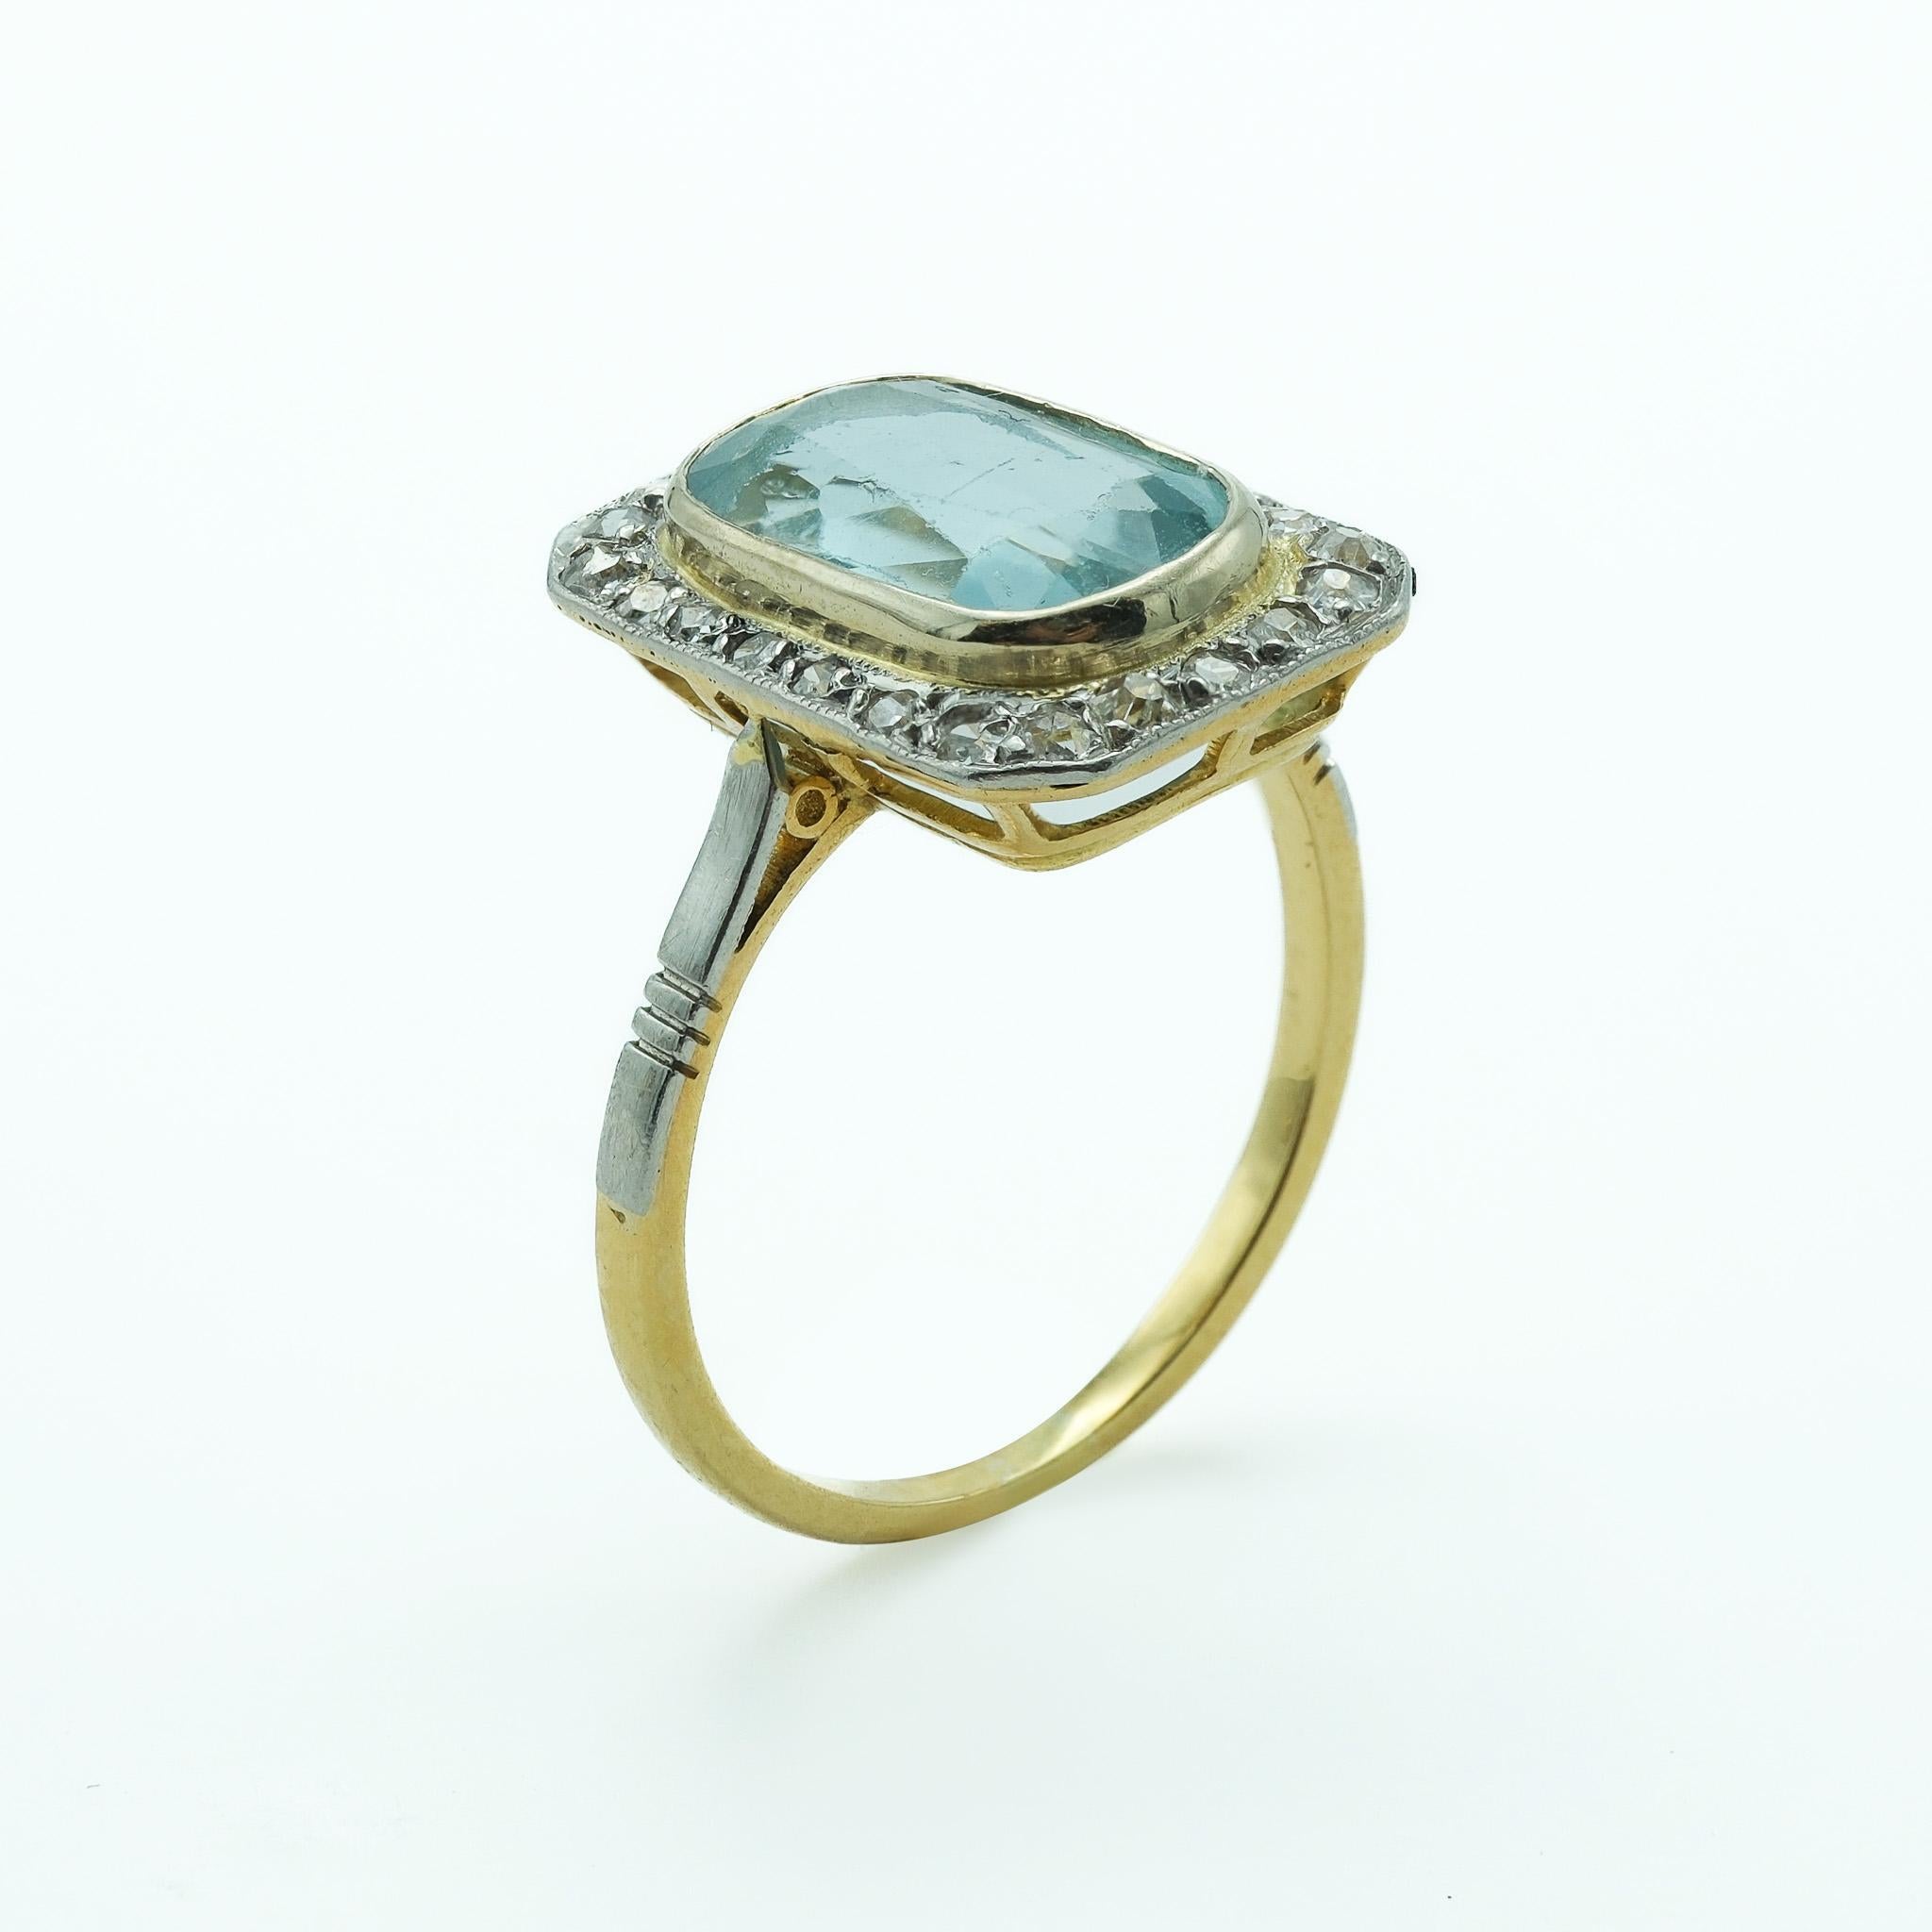 This ring is a fine example of Victorian-era craftsmanship, showcasing a blend of durability and elegance. The centerpiece, a cushion-cut aquamarine, is secured in a platinum setting, providing a durable and visually striking contrast. The stone's